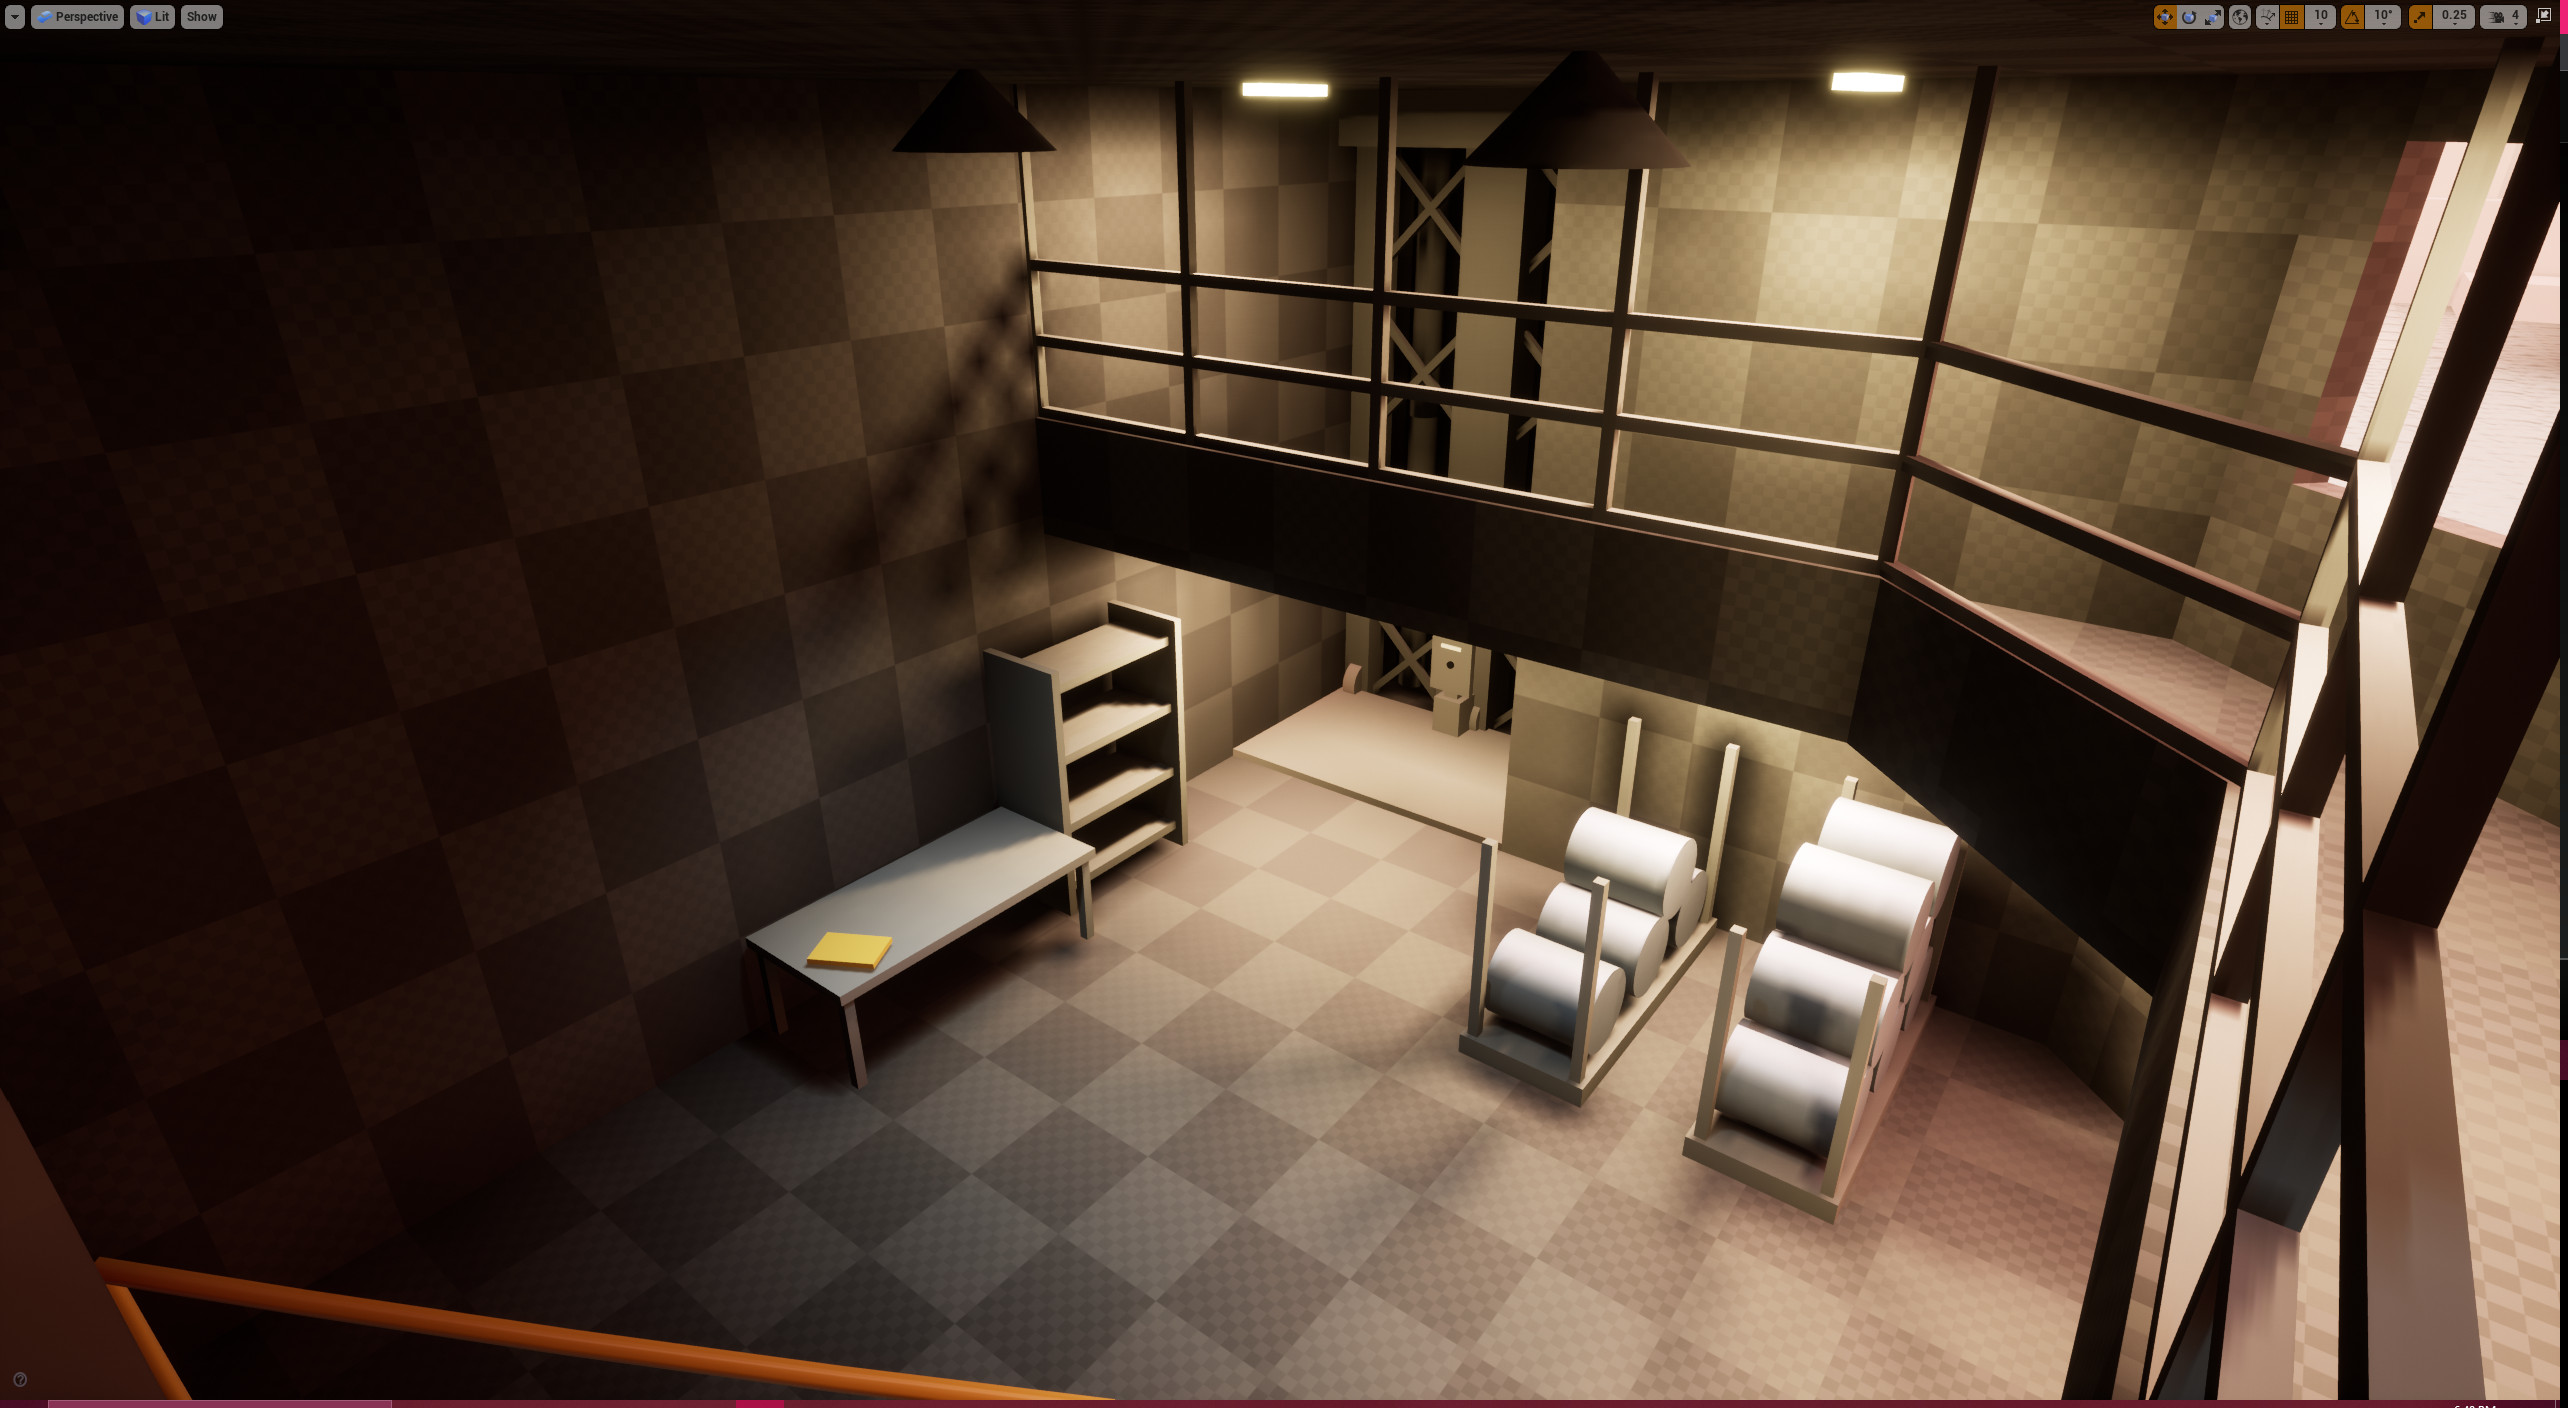 An interior room that the player uses to access station control.